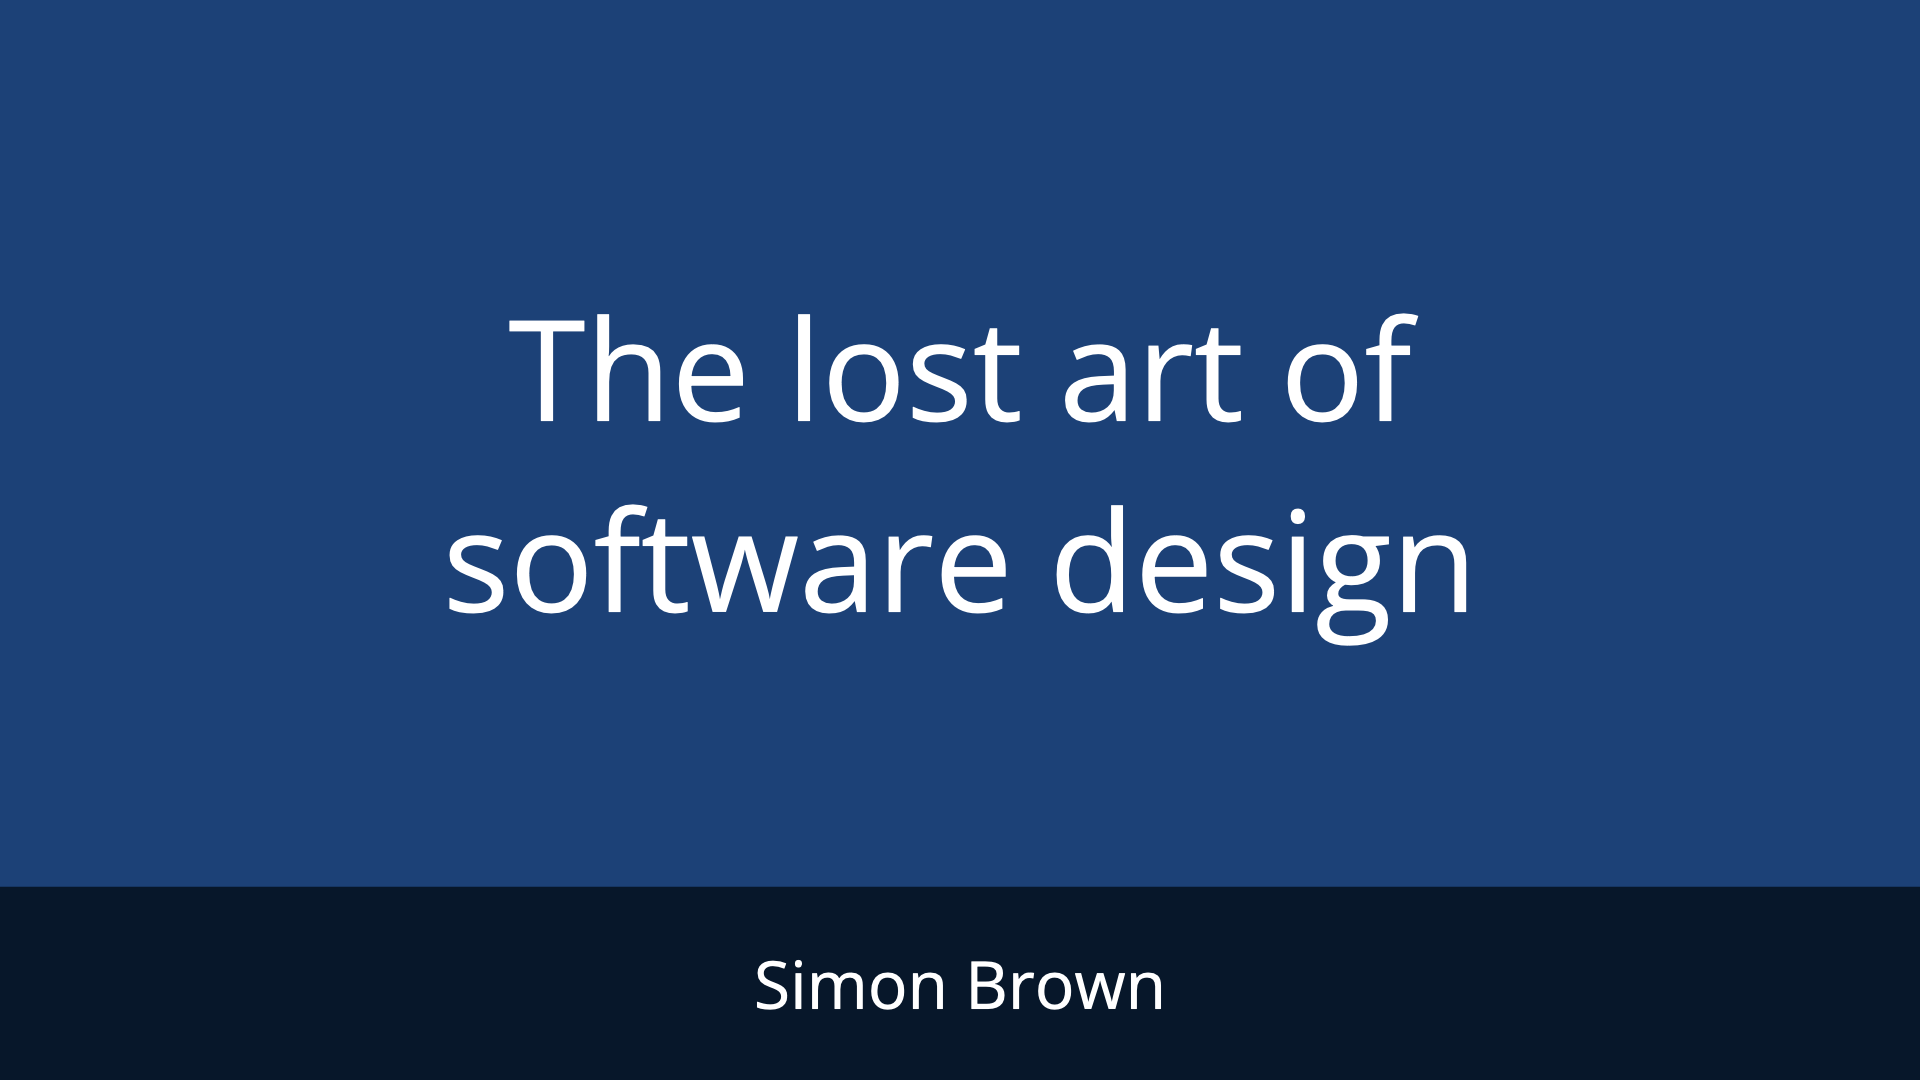 The lost art of software design